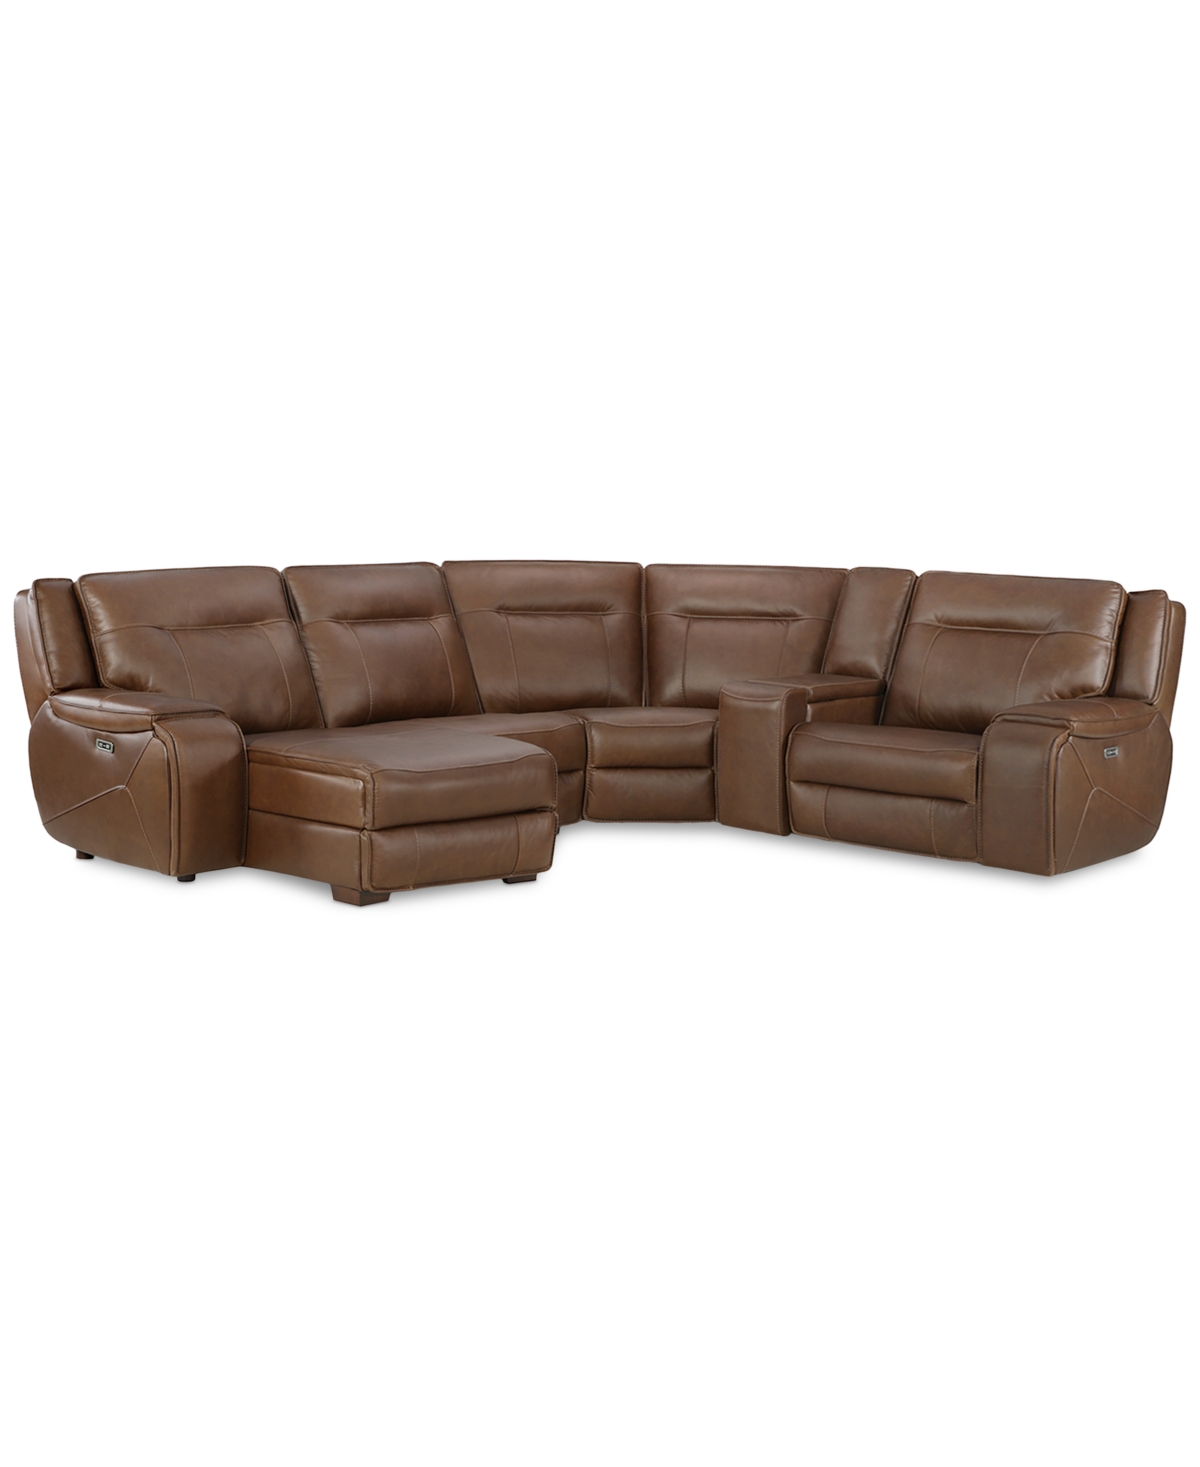 Macy's Hansley 5-pc. Zero Gravity Leather Sectional With Power Recliner And Chaise, Created For  In Brown